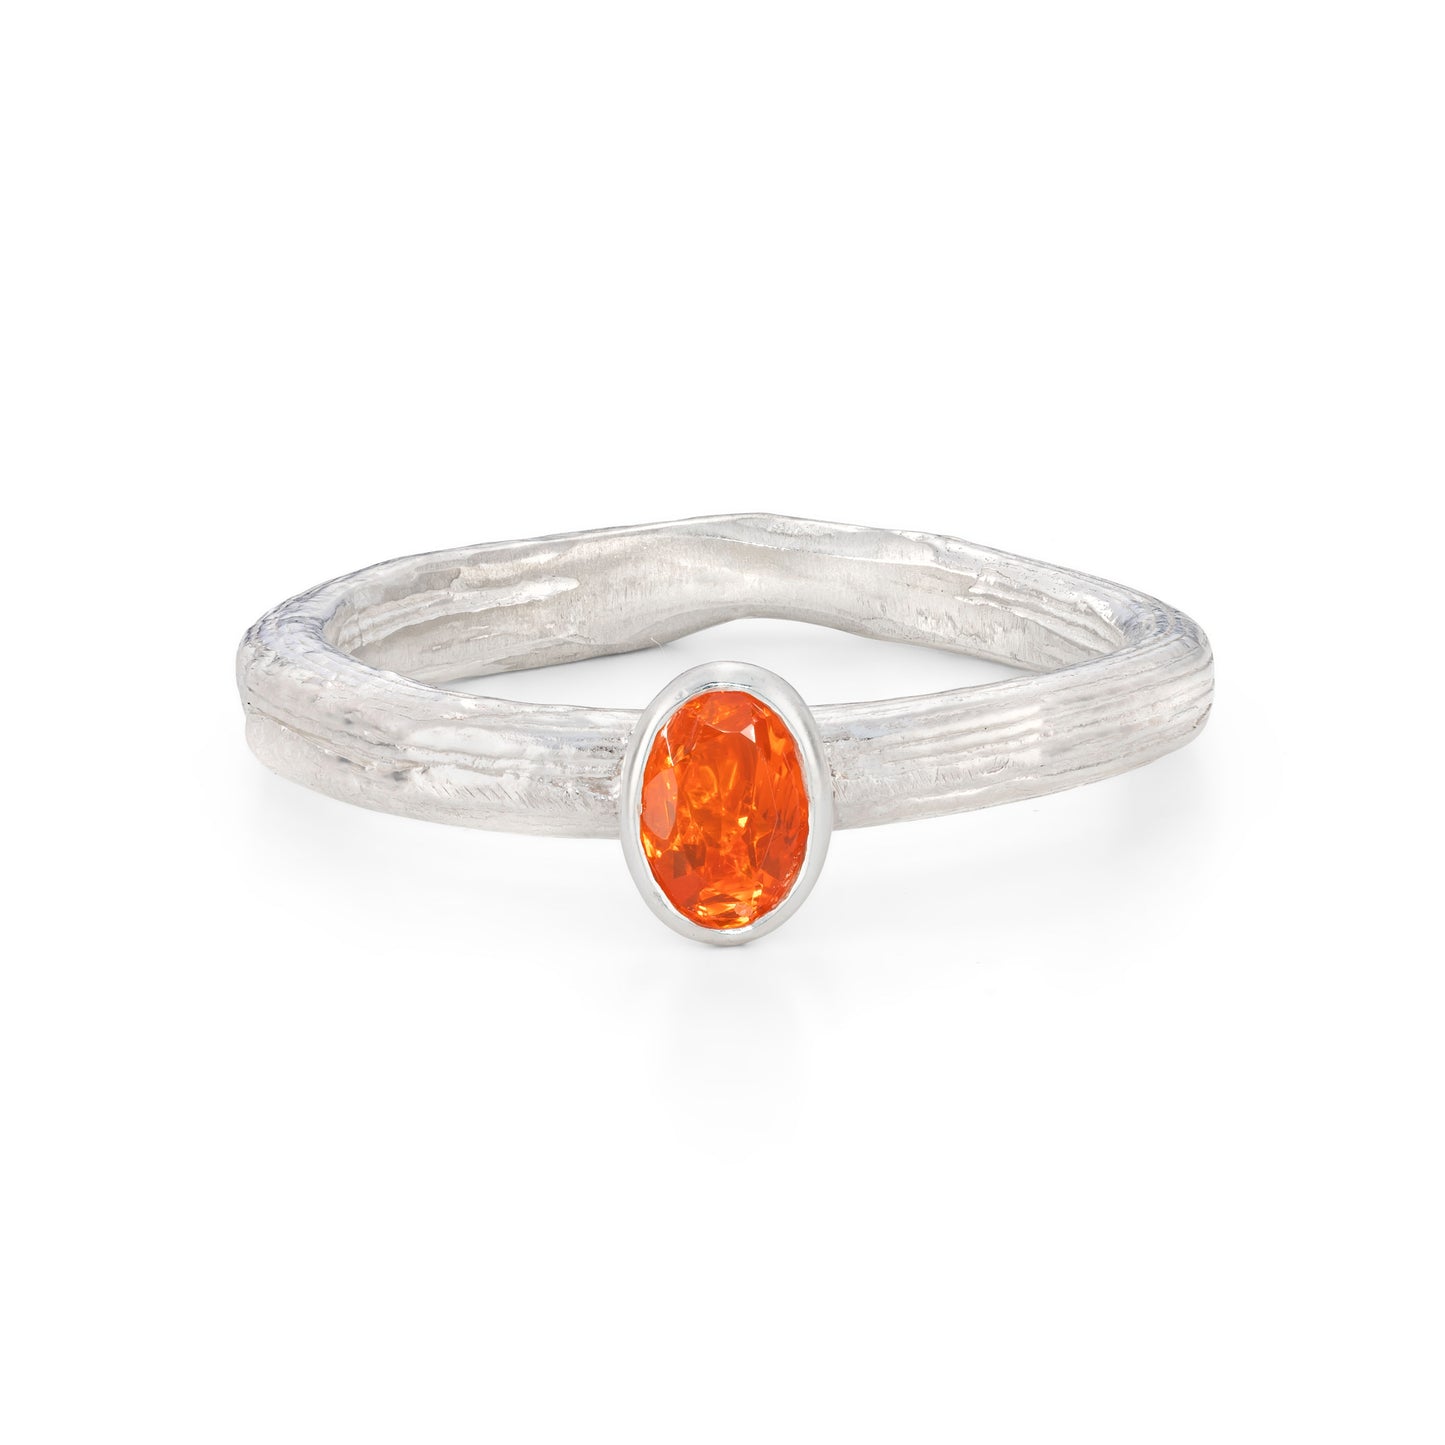 Horse Chestnut Twig ring with fire opal